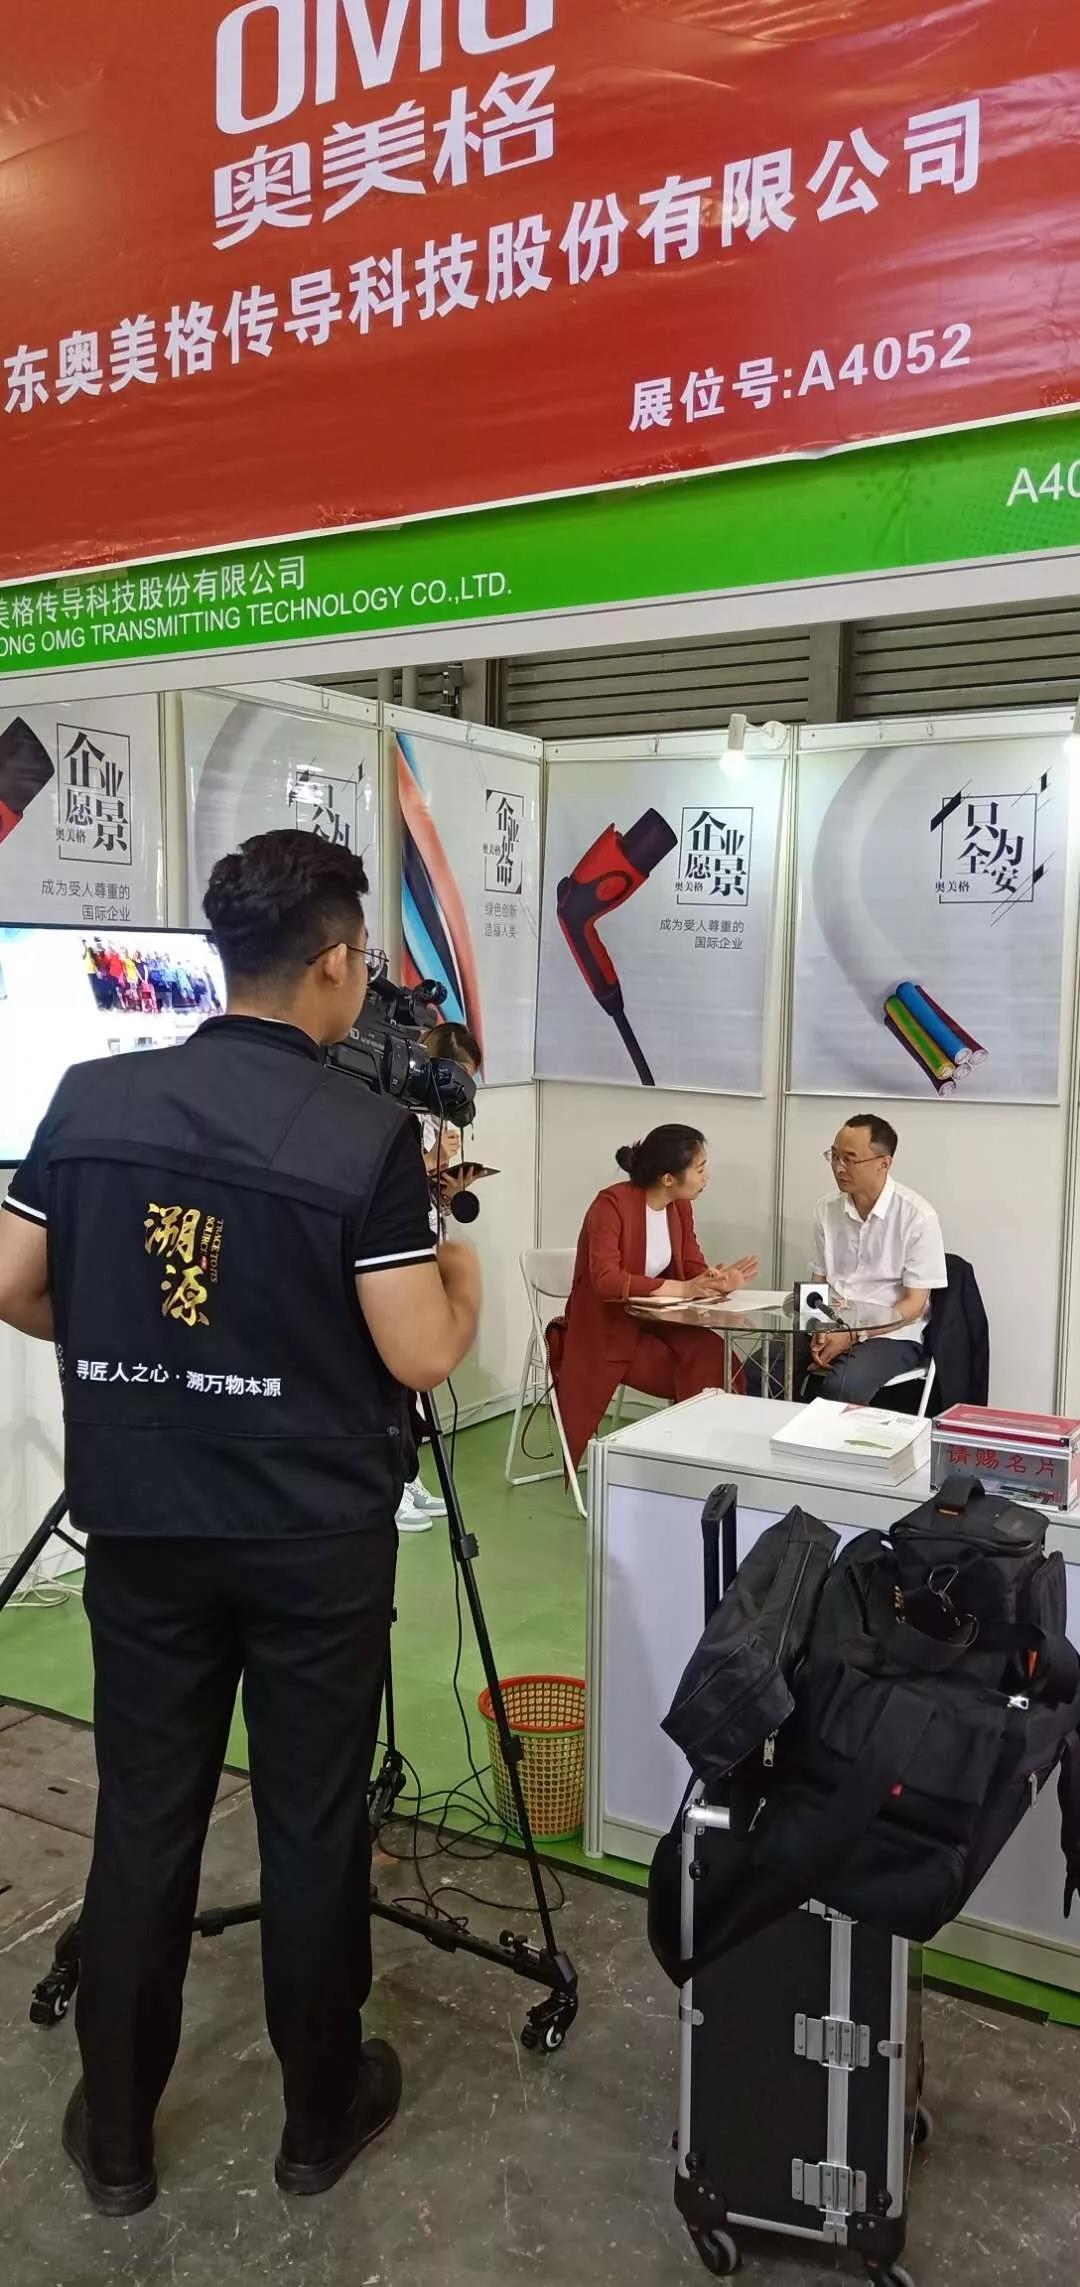 OMG participated in the 11th Shanghai International Charging Station (Pile) Technology and Equipment Expo 2019